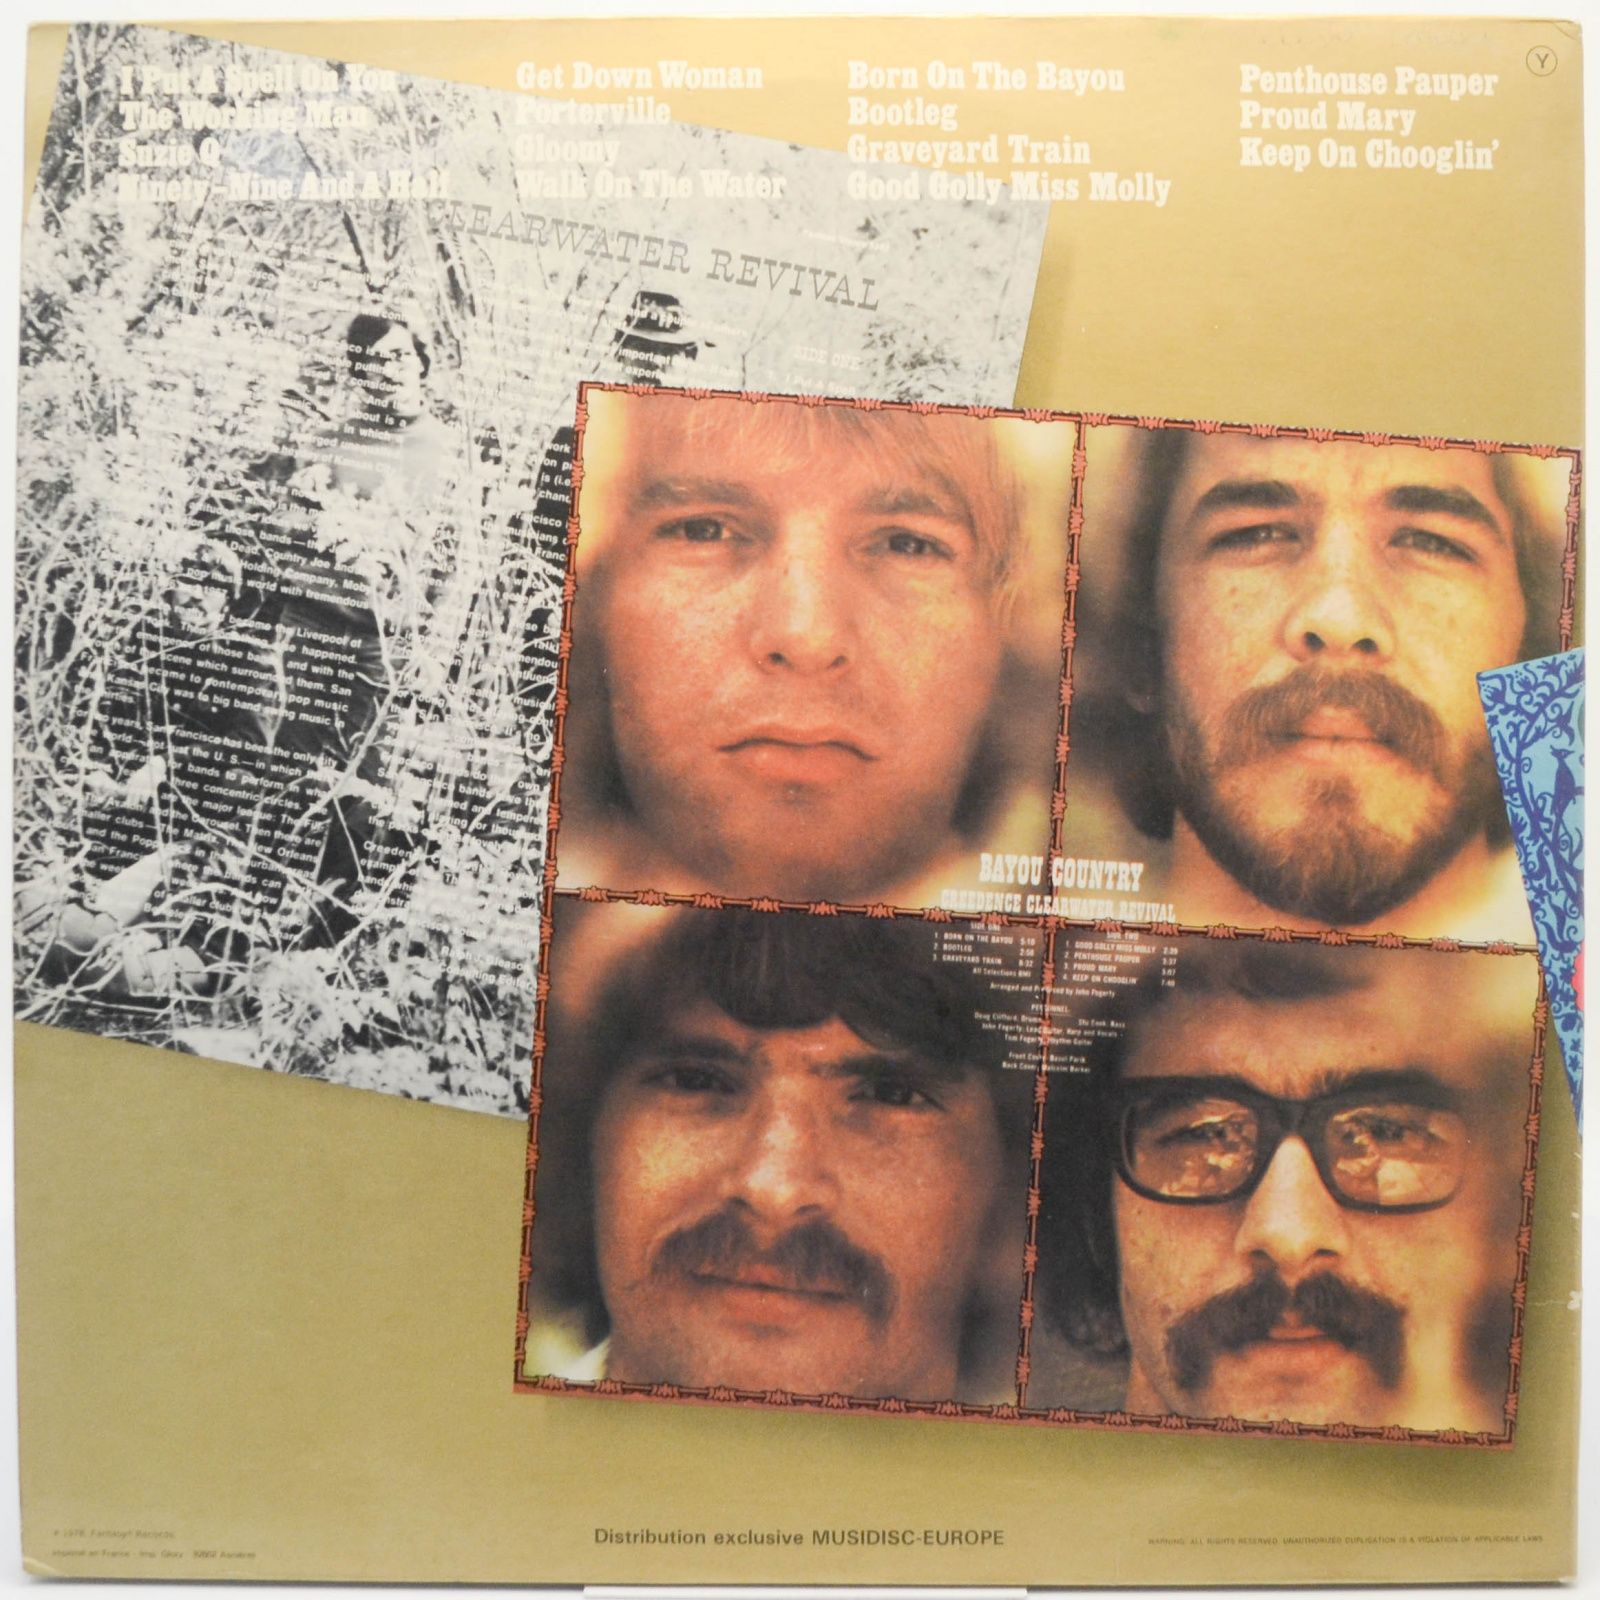 Creedence Clearwater Revival — Creedence Clearwater Revival 1968/69 (2LP), 1978